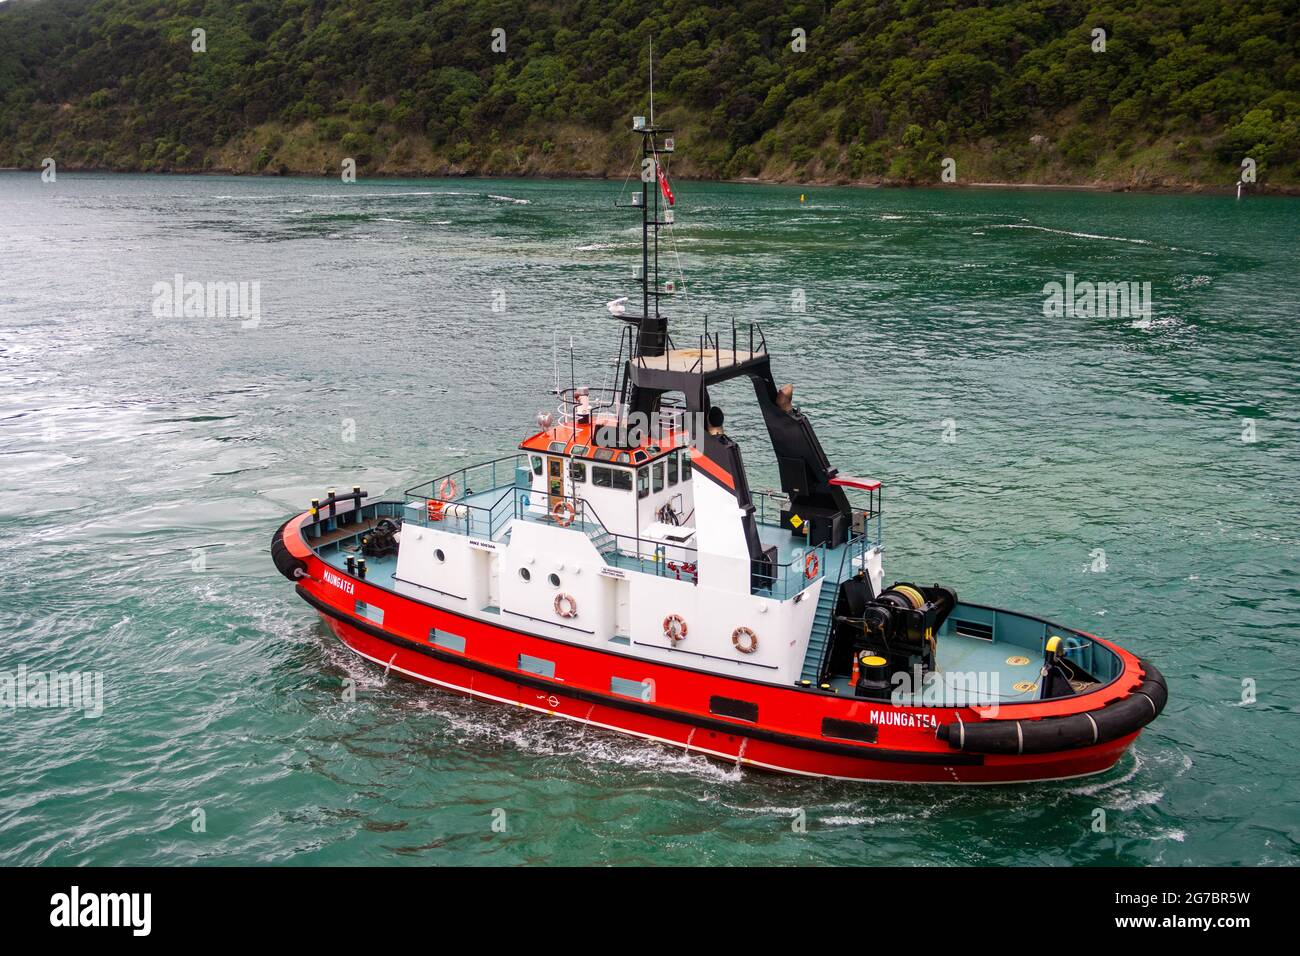 Picton, Marlborough, New Zealand, June 26 2021: The pilot boat, Maungatea, helps guide the ferry into the wharf safely. Stock Photo